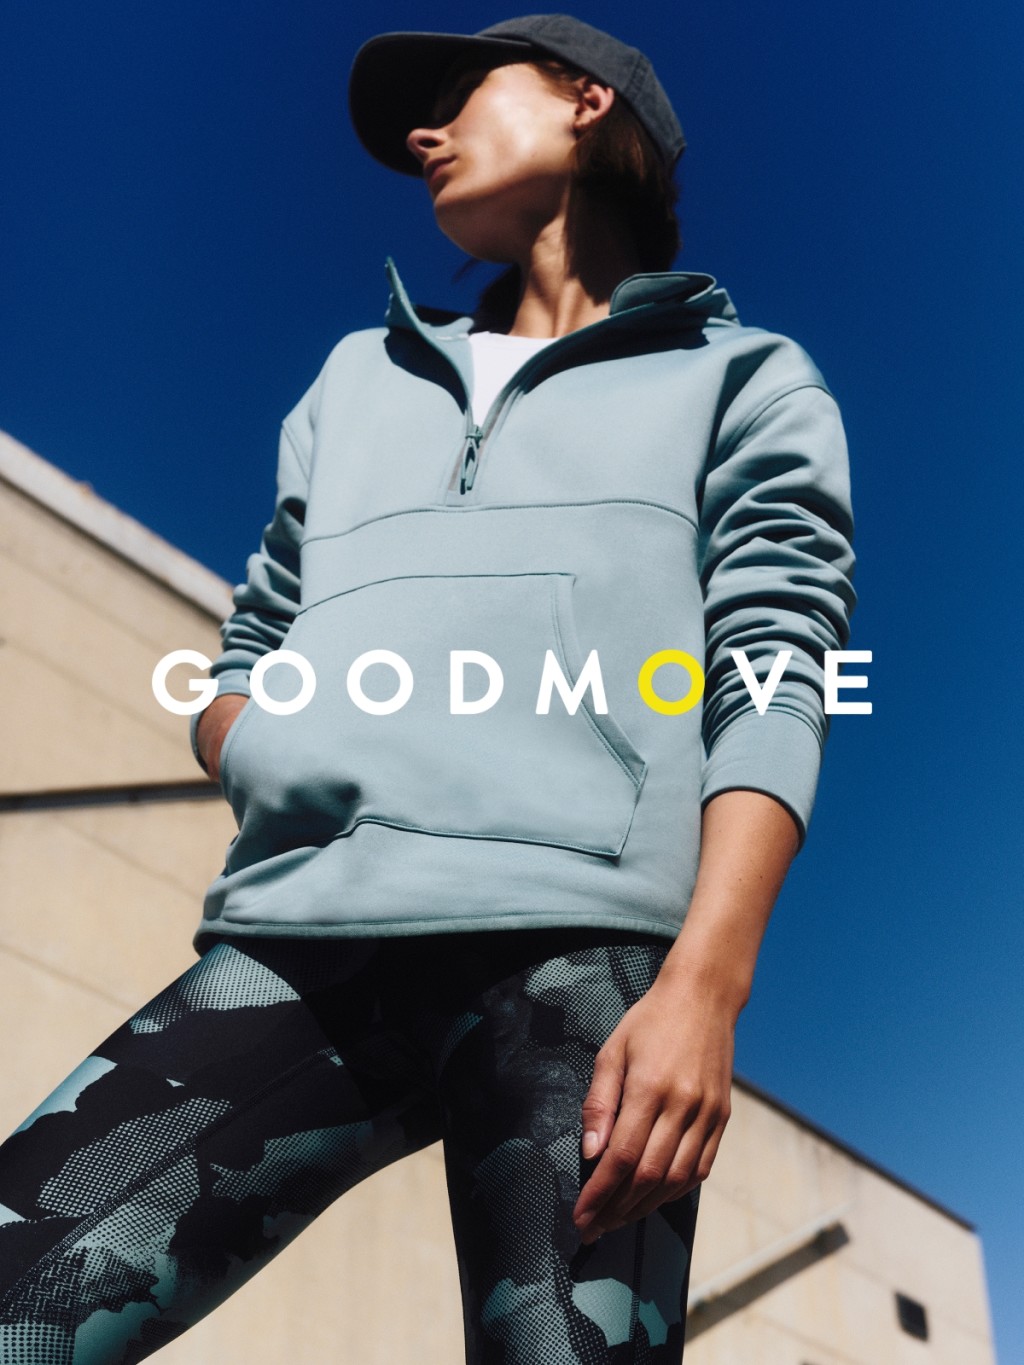 Make your move. Shop now